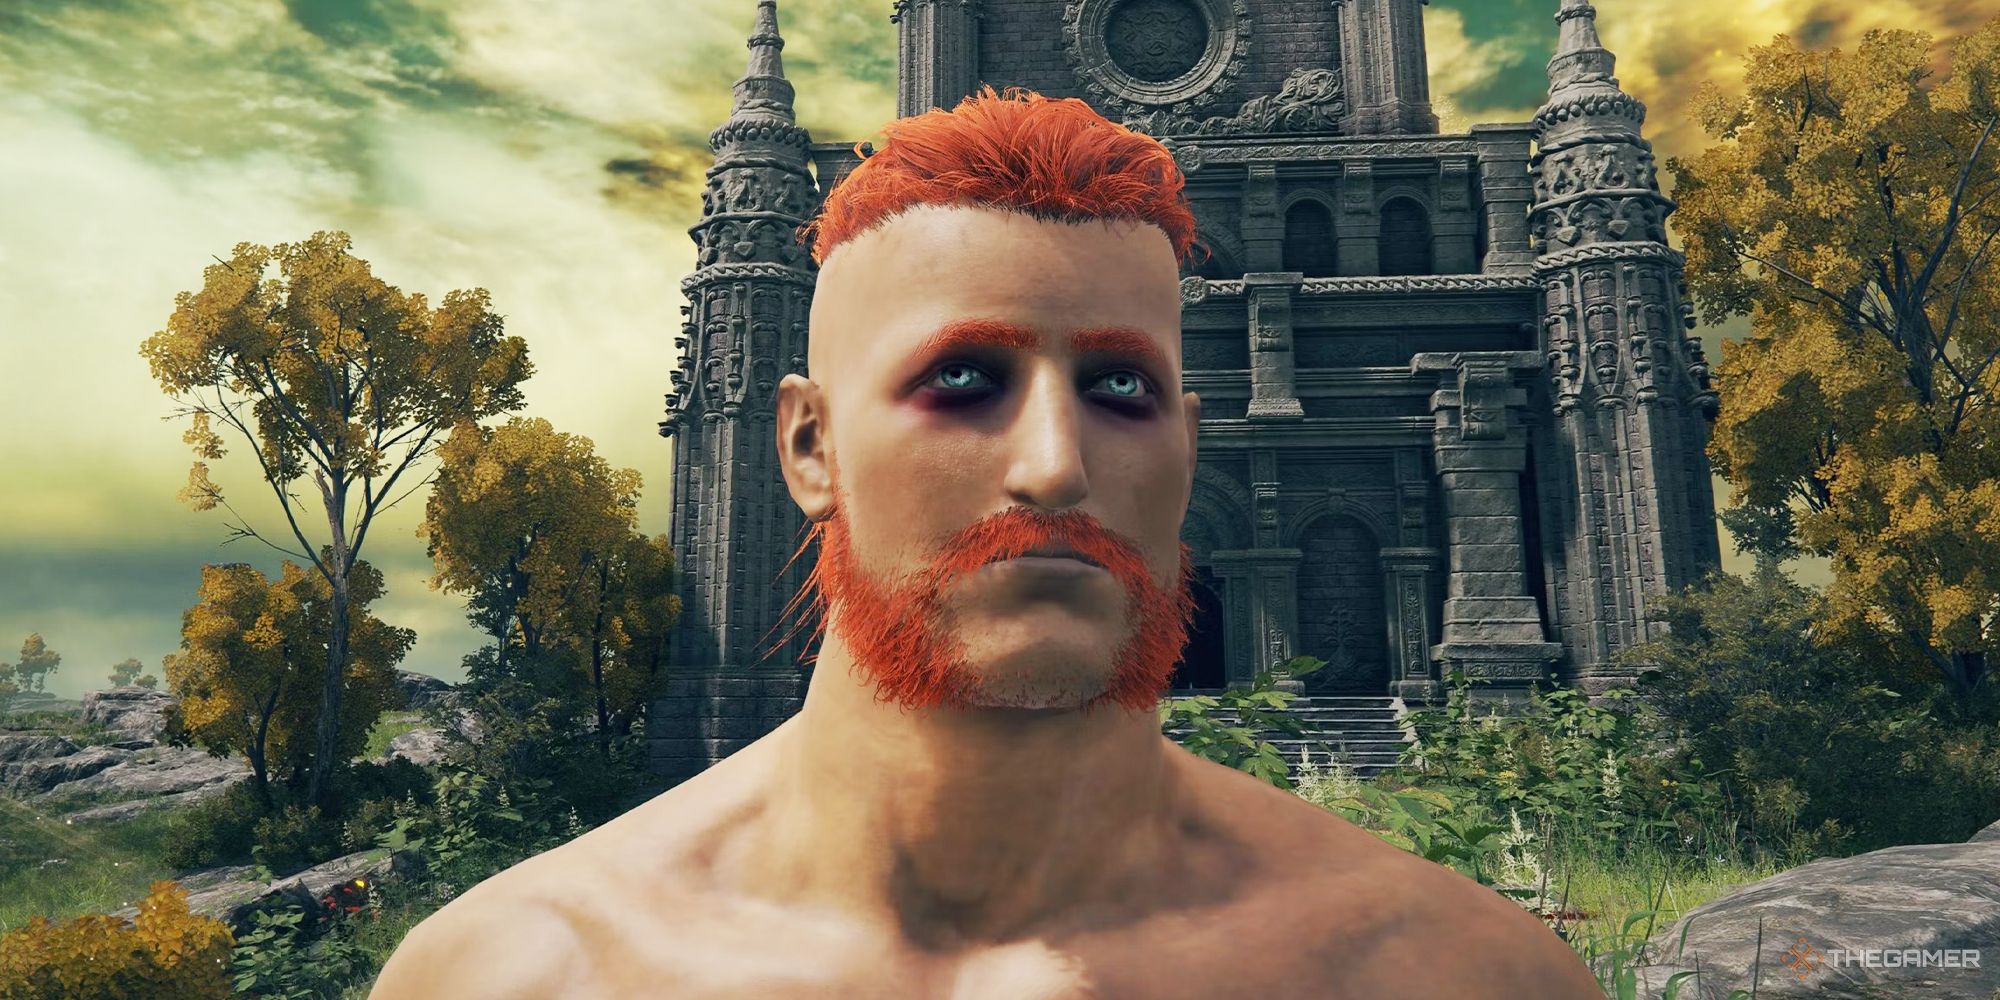 Elden Ring Tarnished standing in front of a church naked with bright ginger beard and hair